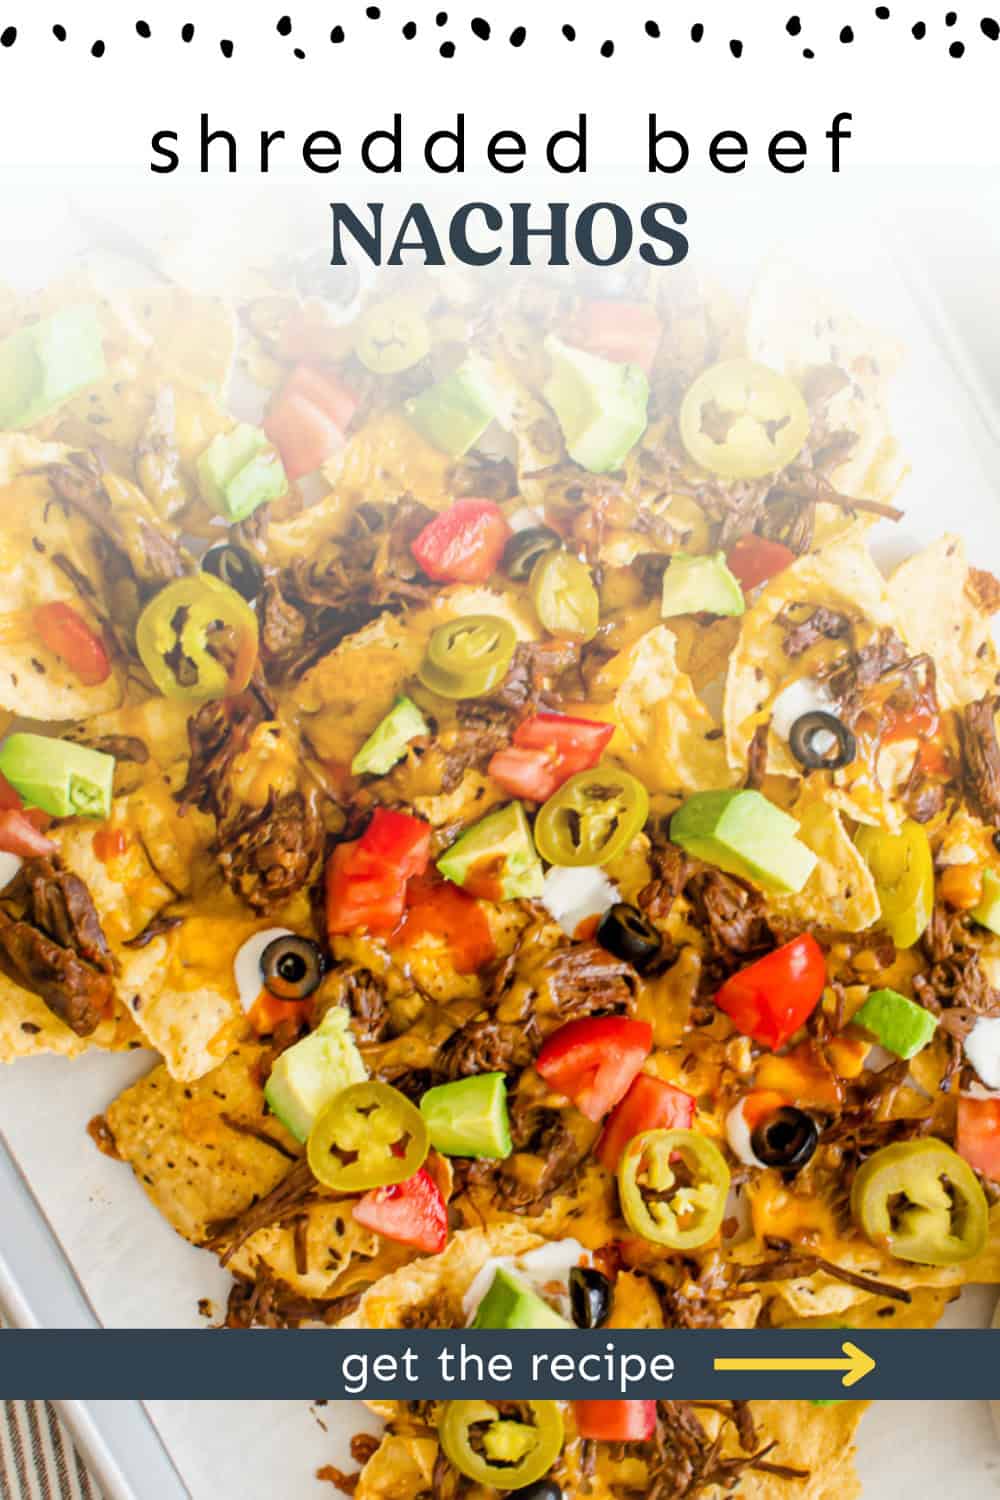 Shredded beef nachos on a baking sheet with toppings on it ready to serve.